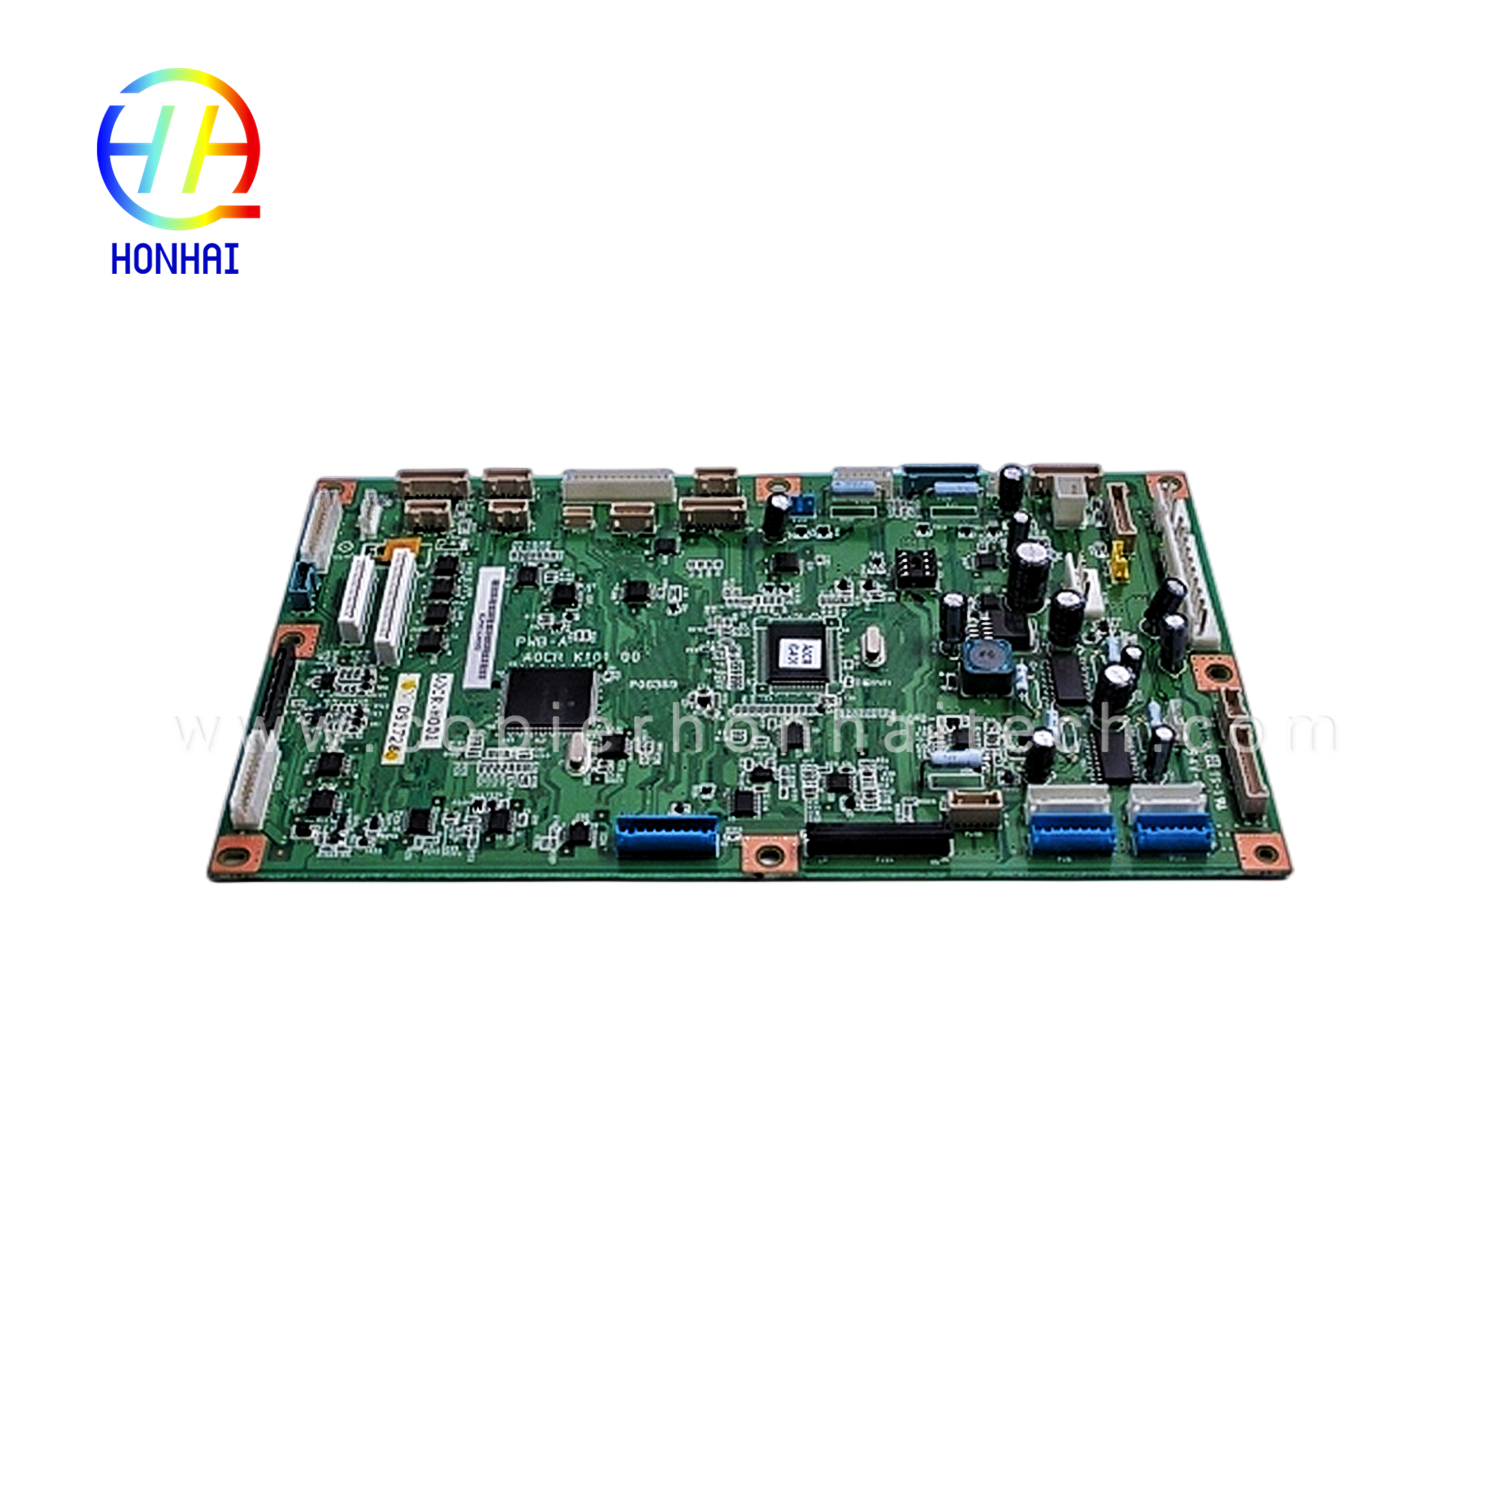 Engine Ctlr MCU Board Mfpb Assembly para sa Xerox Workcentre 6400 960K51970